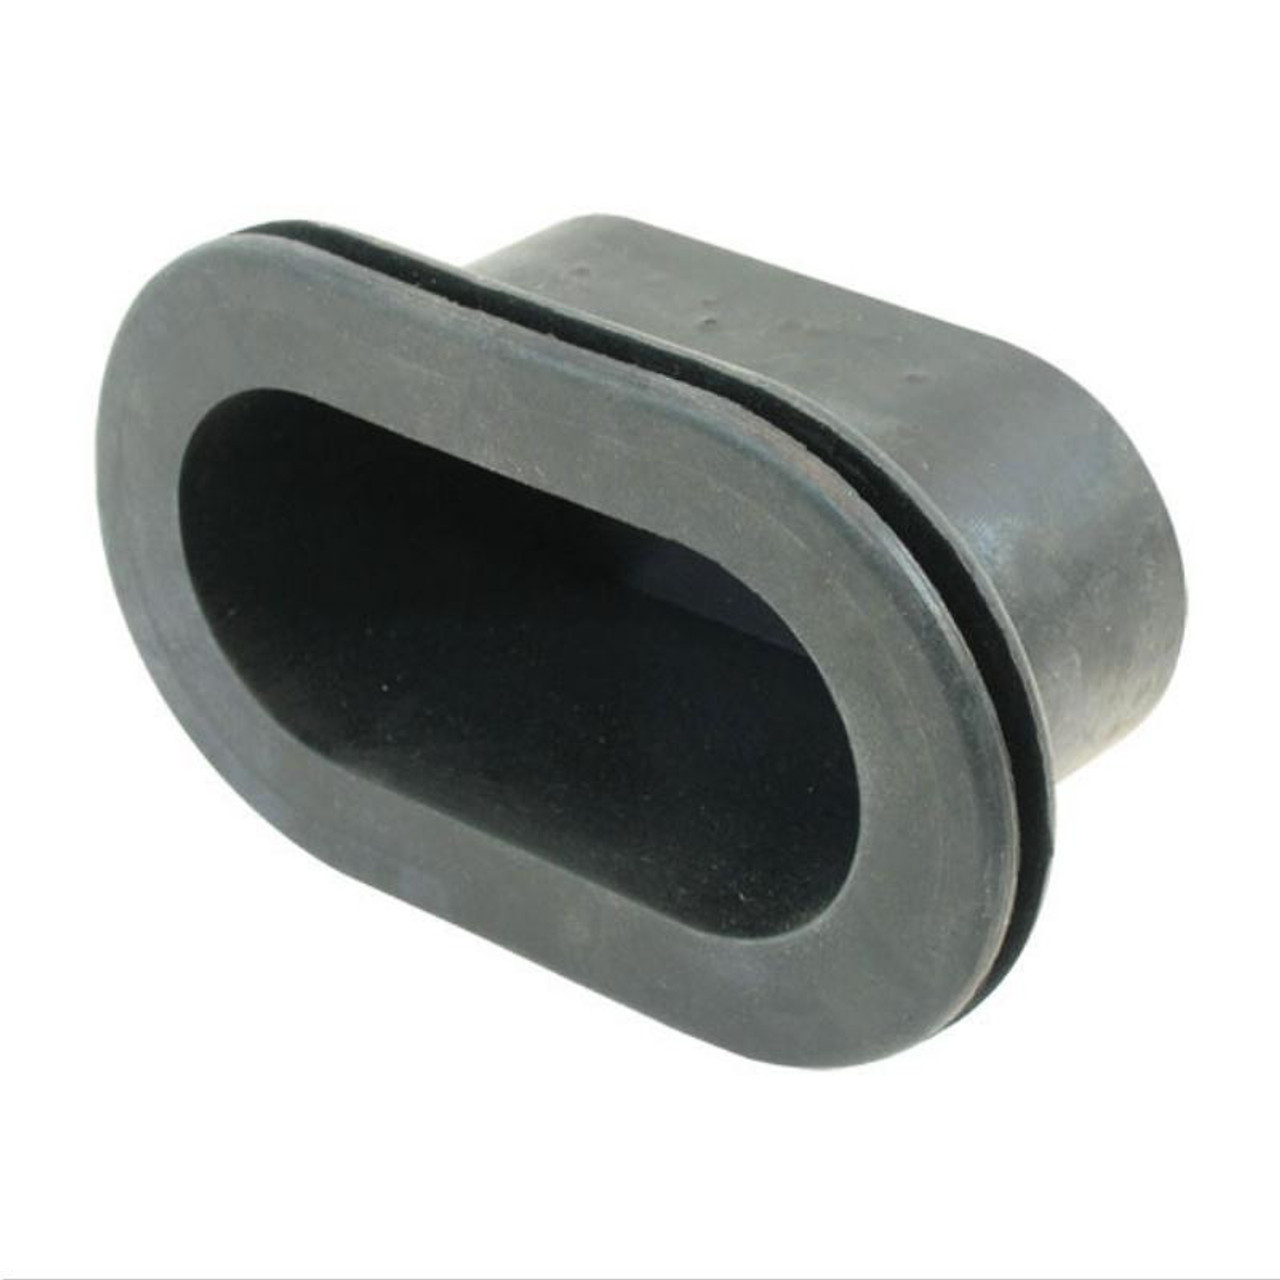 Slop Stopper Oval 115 x 60mm cut out.